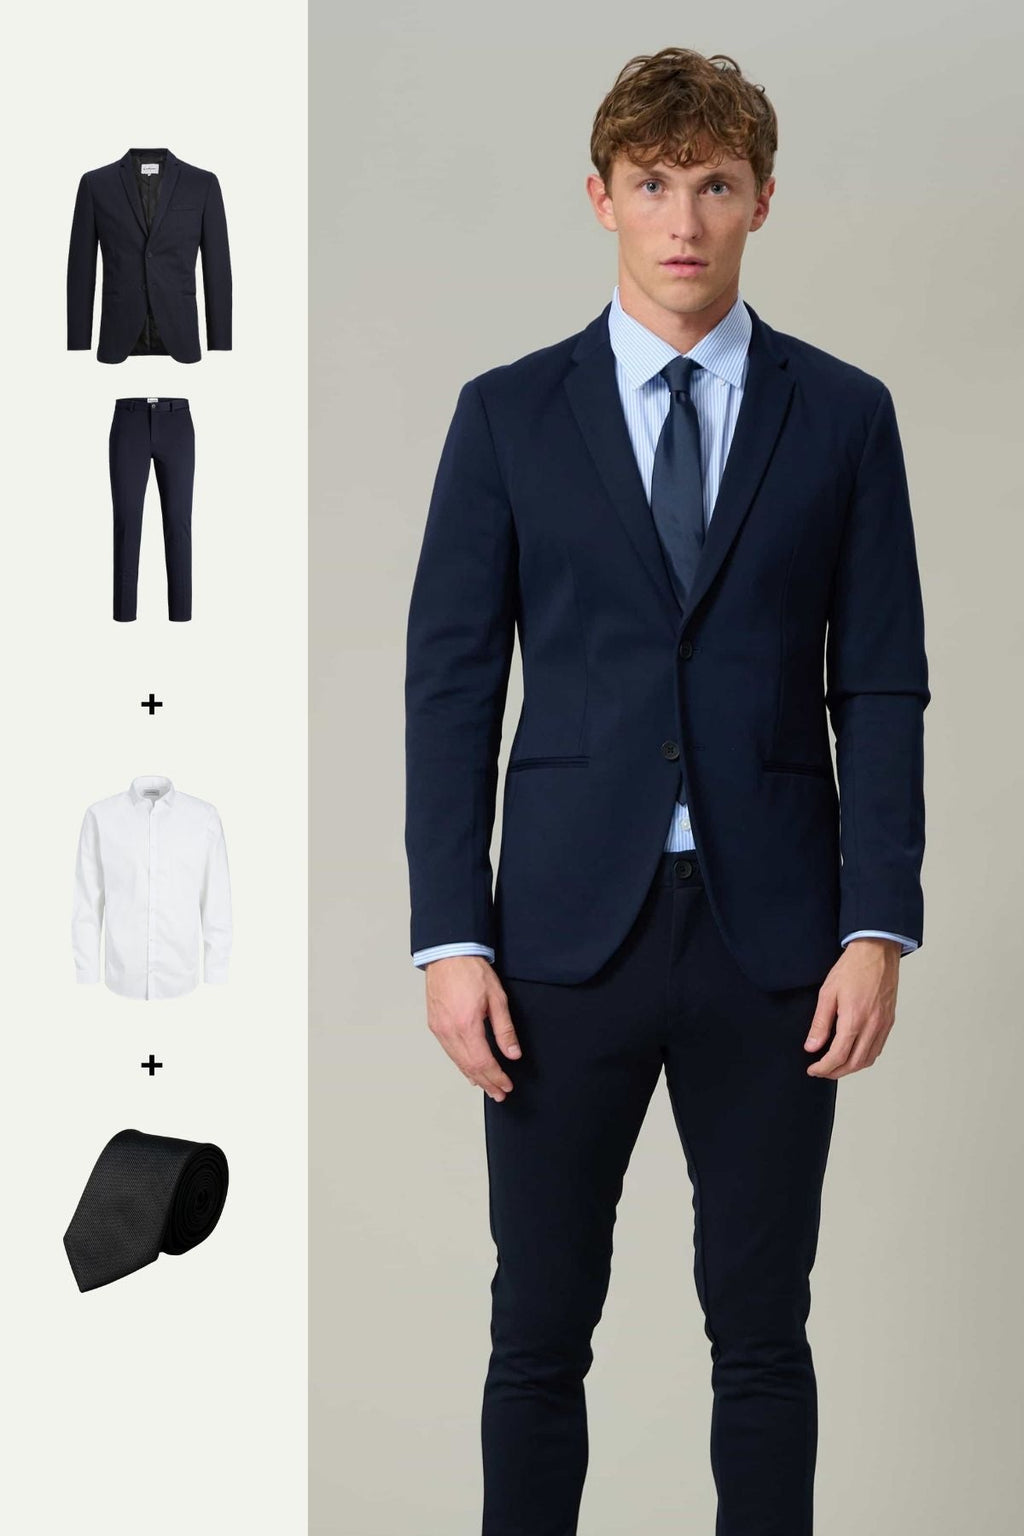 The Original Performance Suit™️ (Navy) + Shirt & Tie - Package Deal (V.I.P)